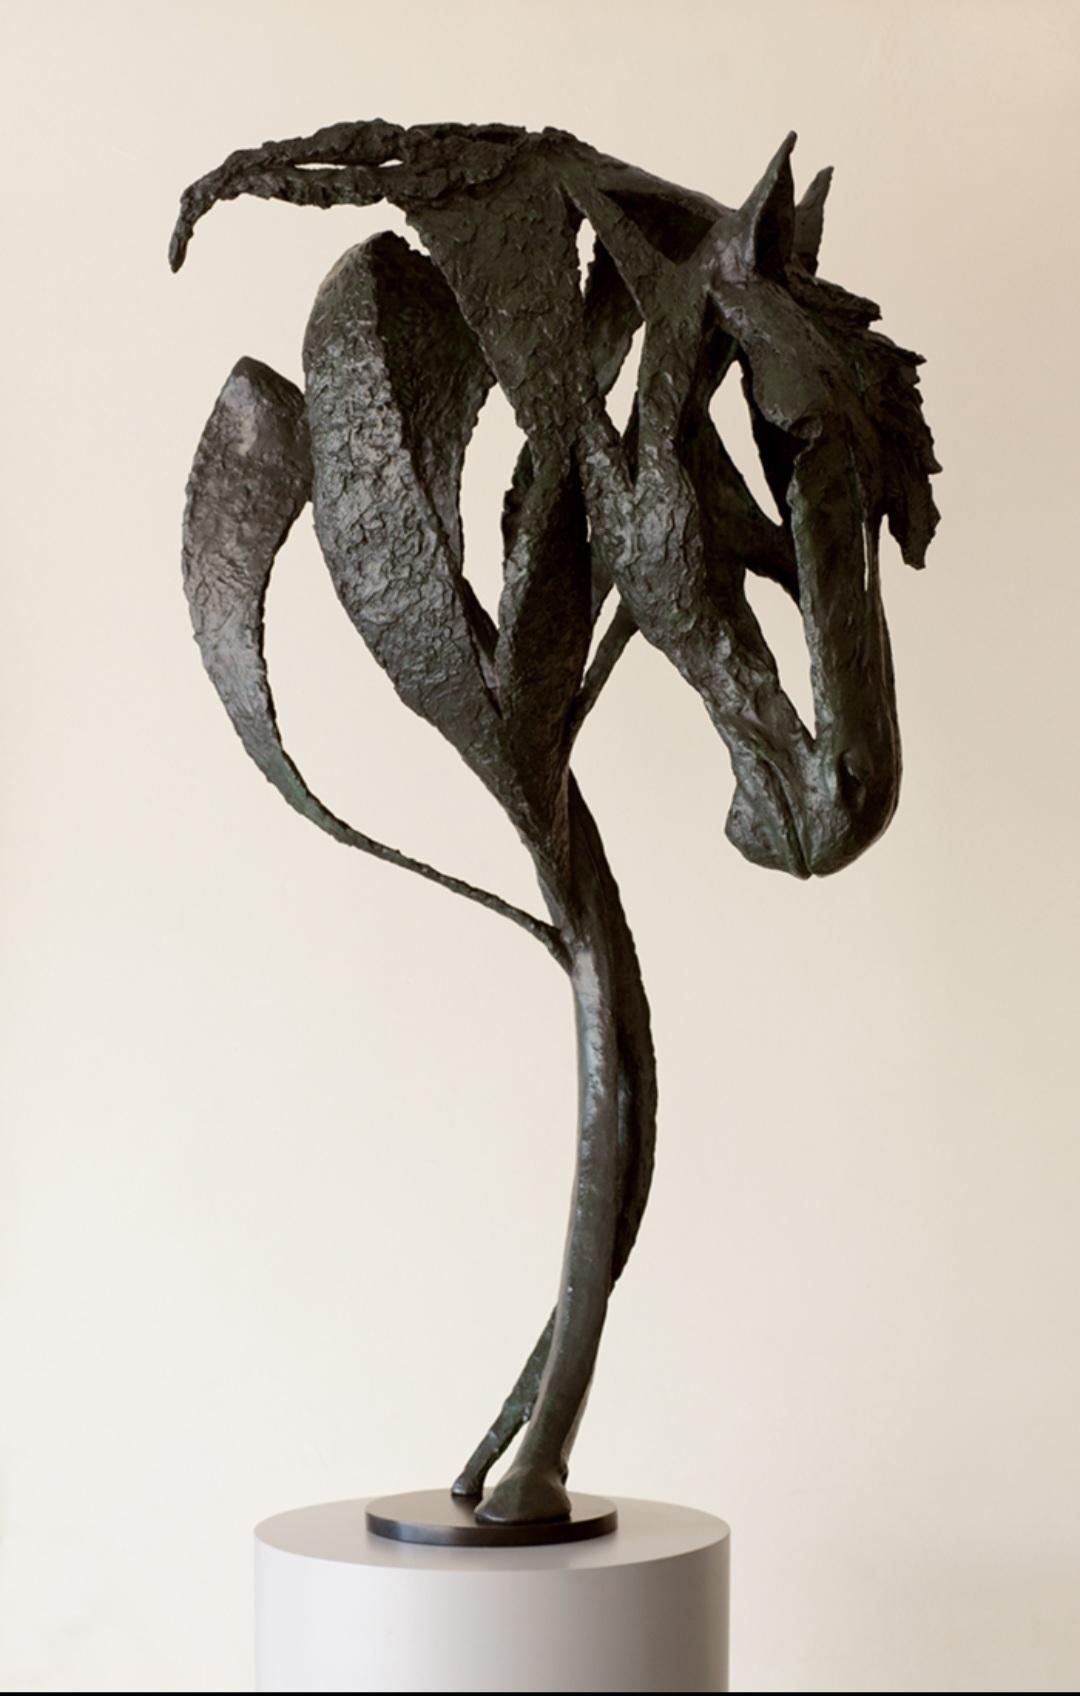 Meandering is a limited edition bronze sculpture of an abstract horse.